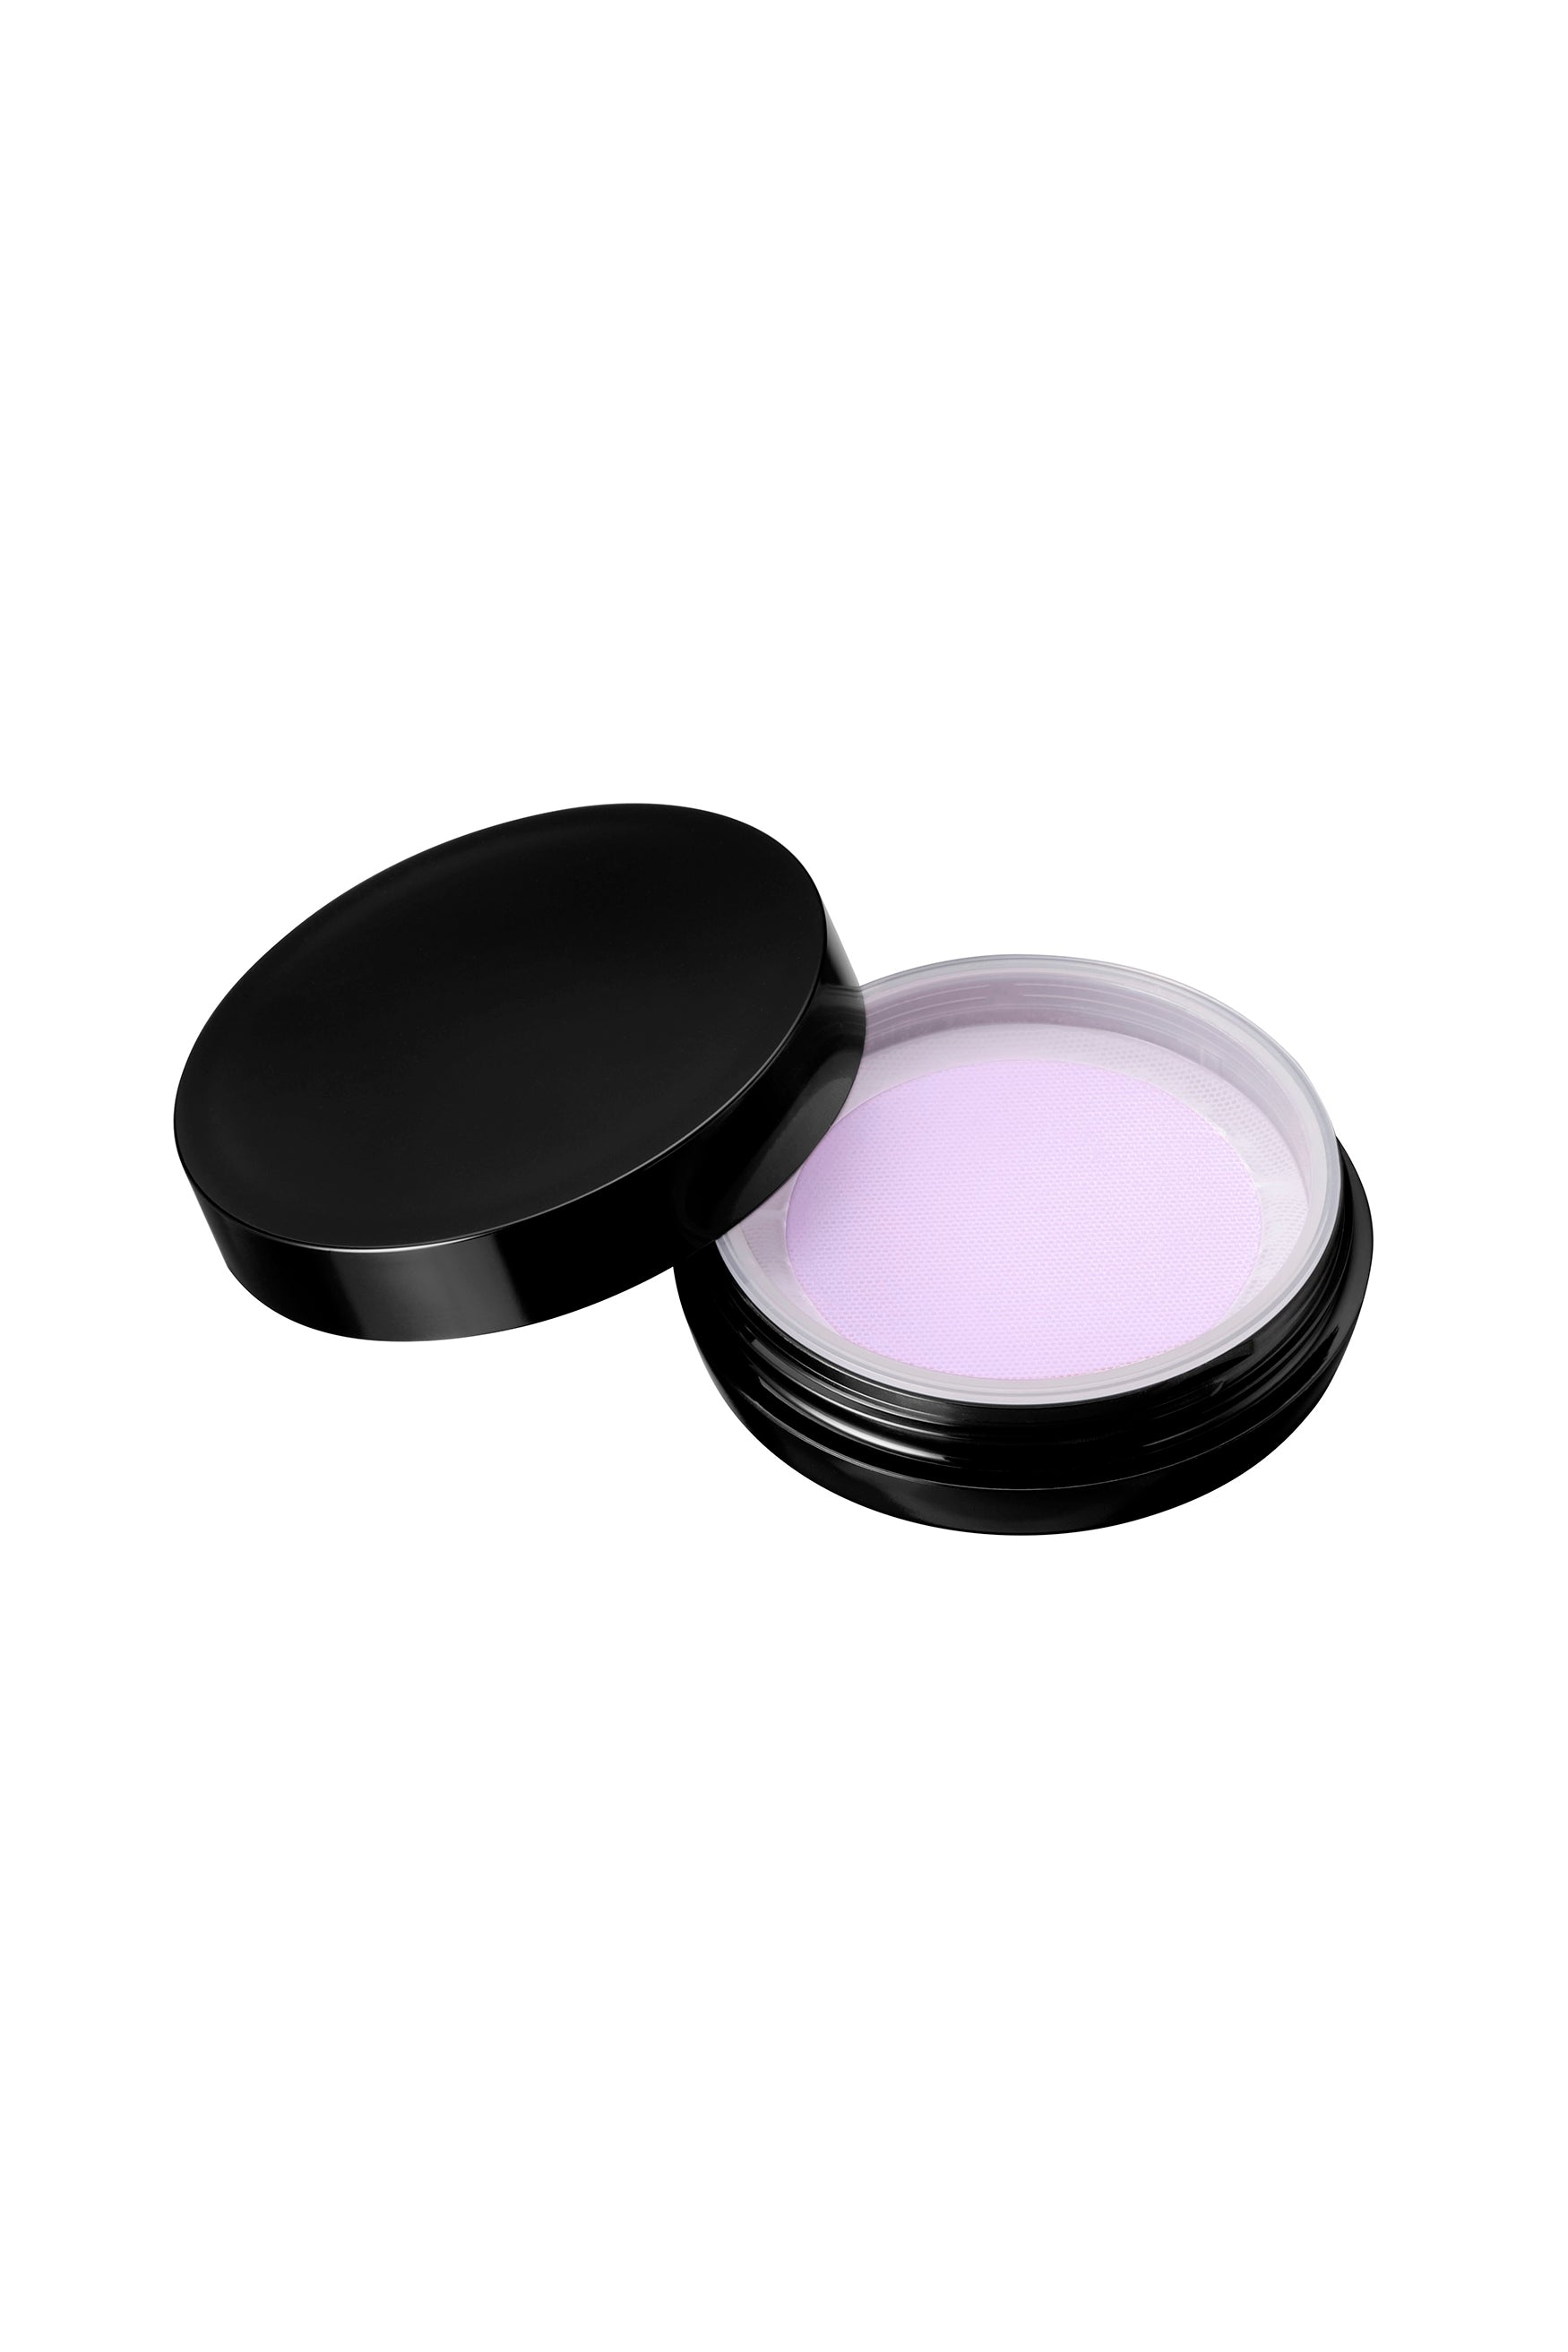 Mini refill in a small round black box, includes amount of rich formula for a flawless complexion